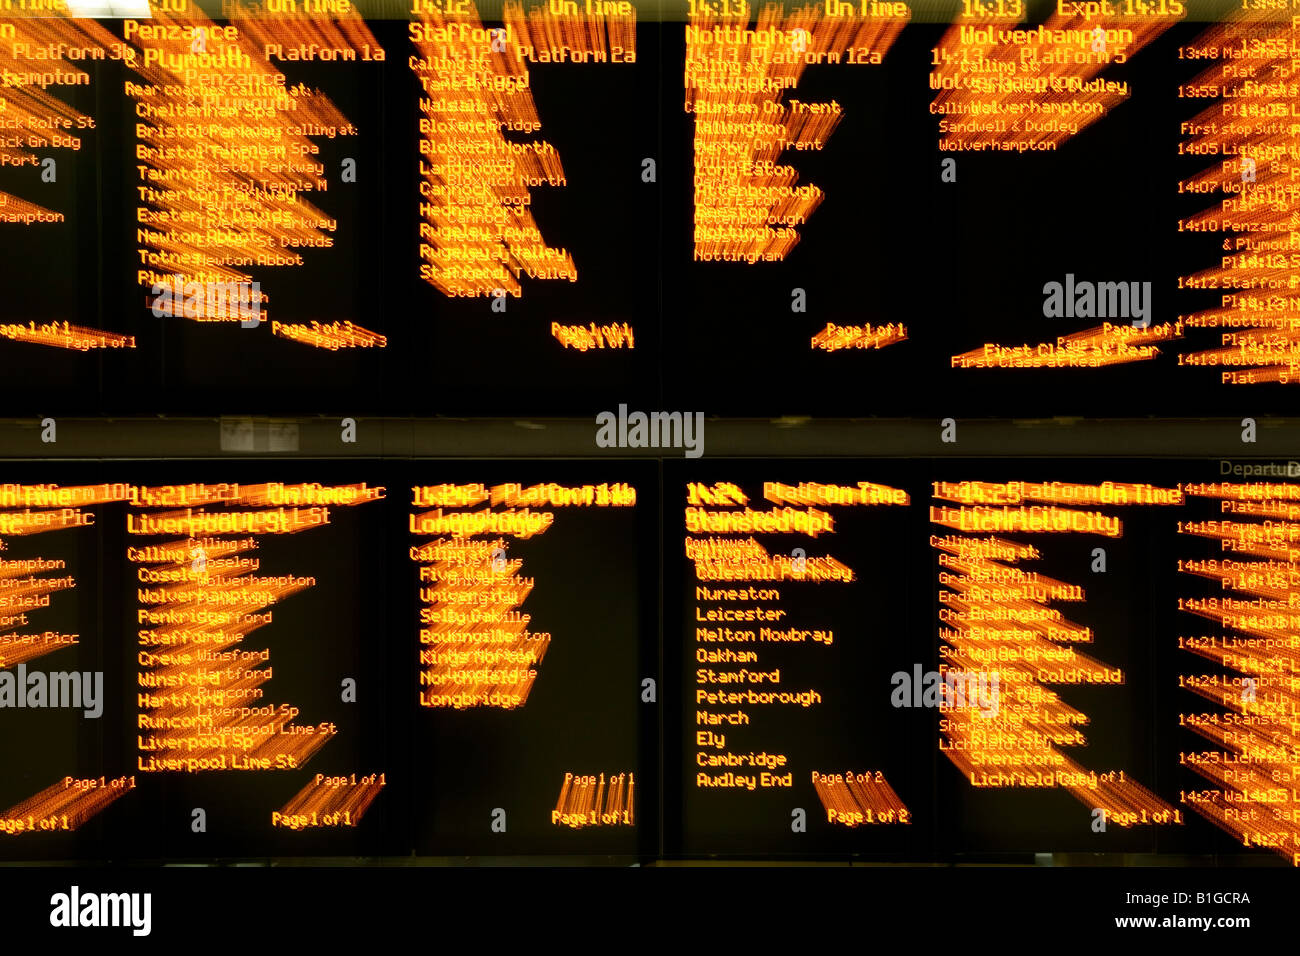 A train timetable in a railway station zoomed in on Stock Photo